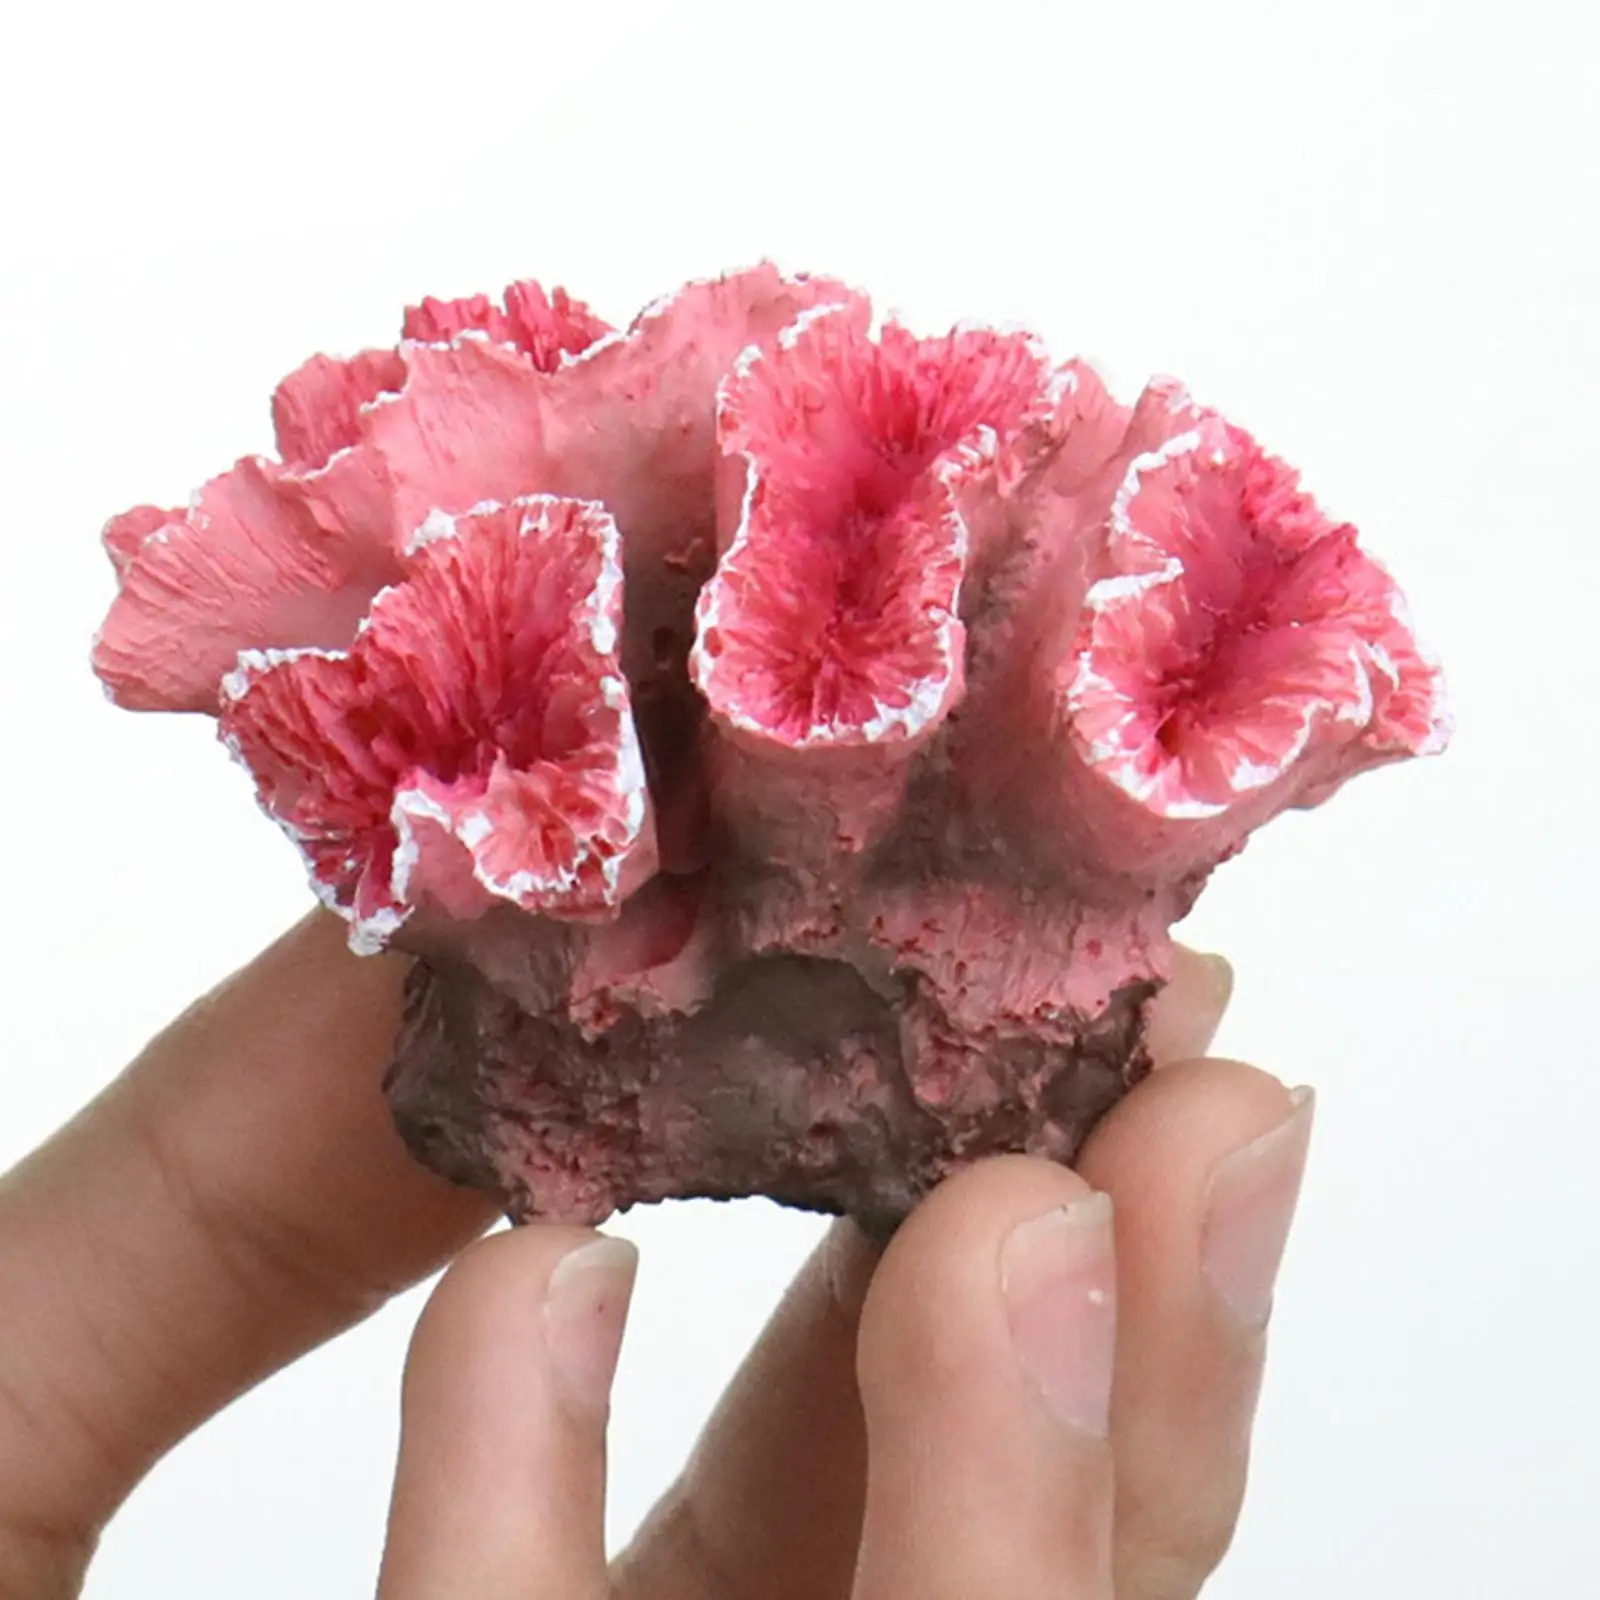 Artificial Coral Scenery Handicraft Resin Compact for Fish Tank Office Home